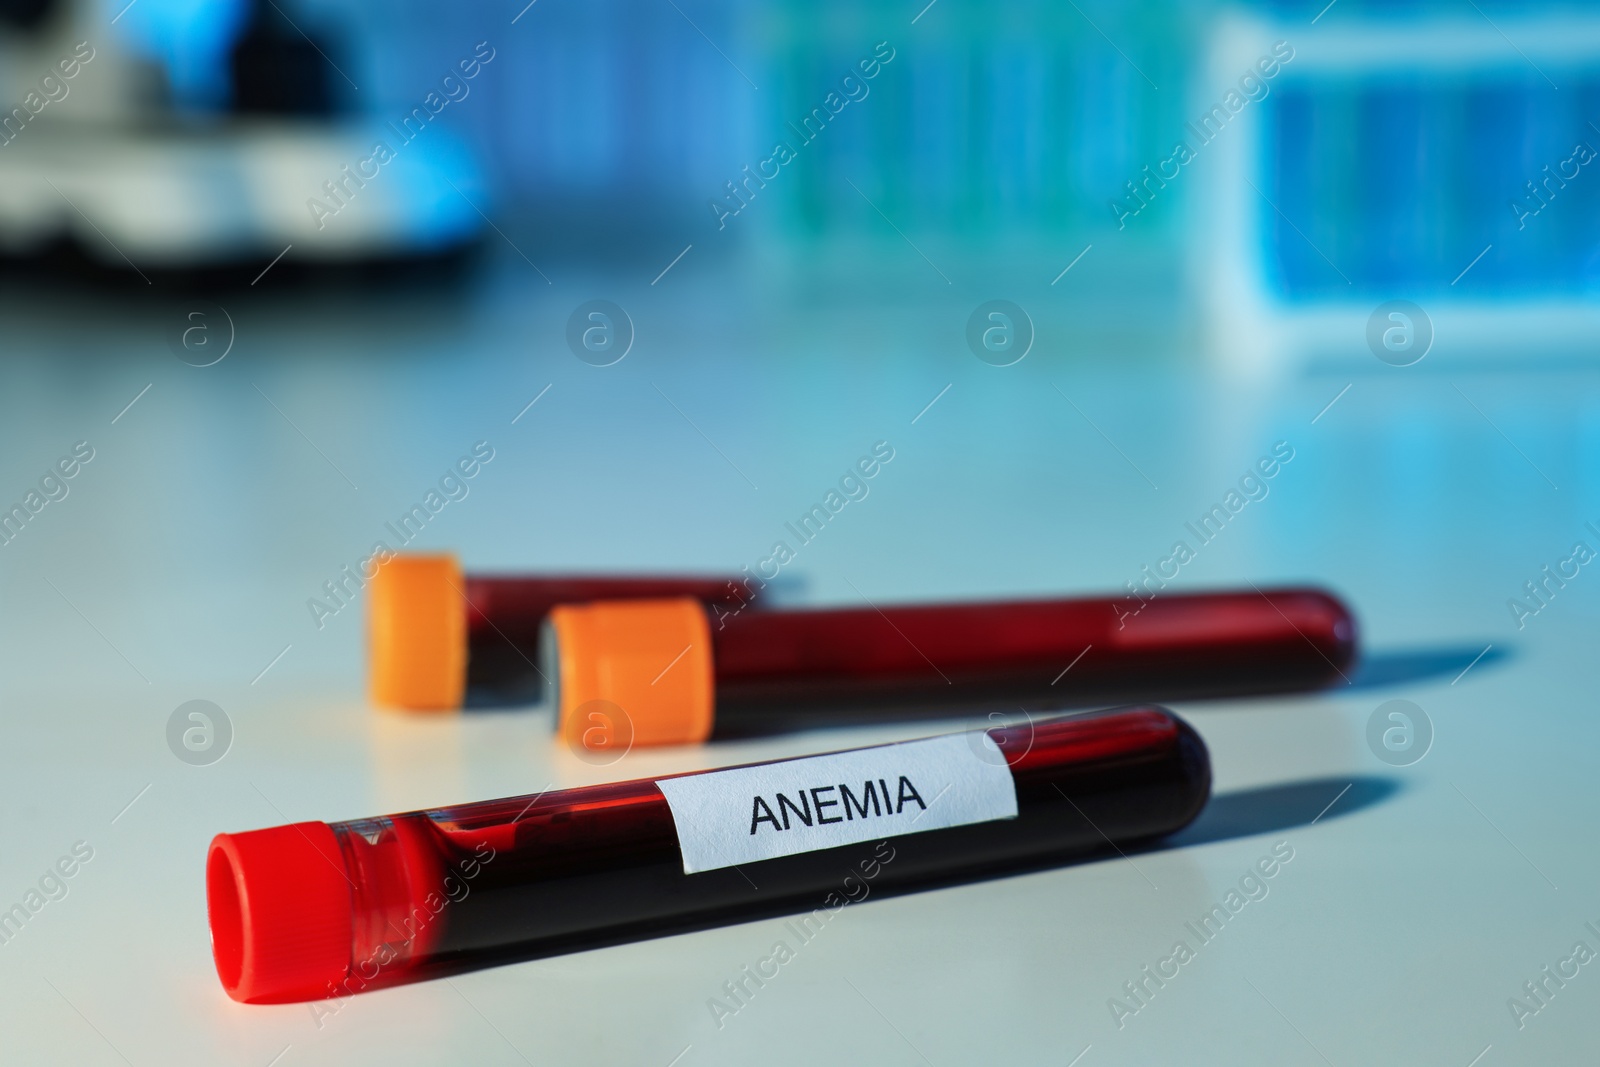 Photo of Test tubes with blood samples and label Anemia on white table against blurred background, closeup. Space for text